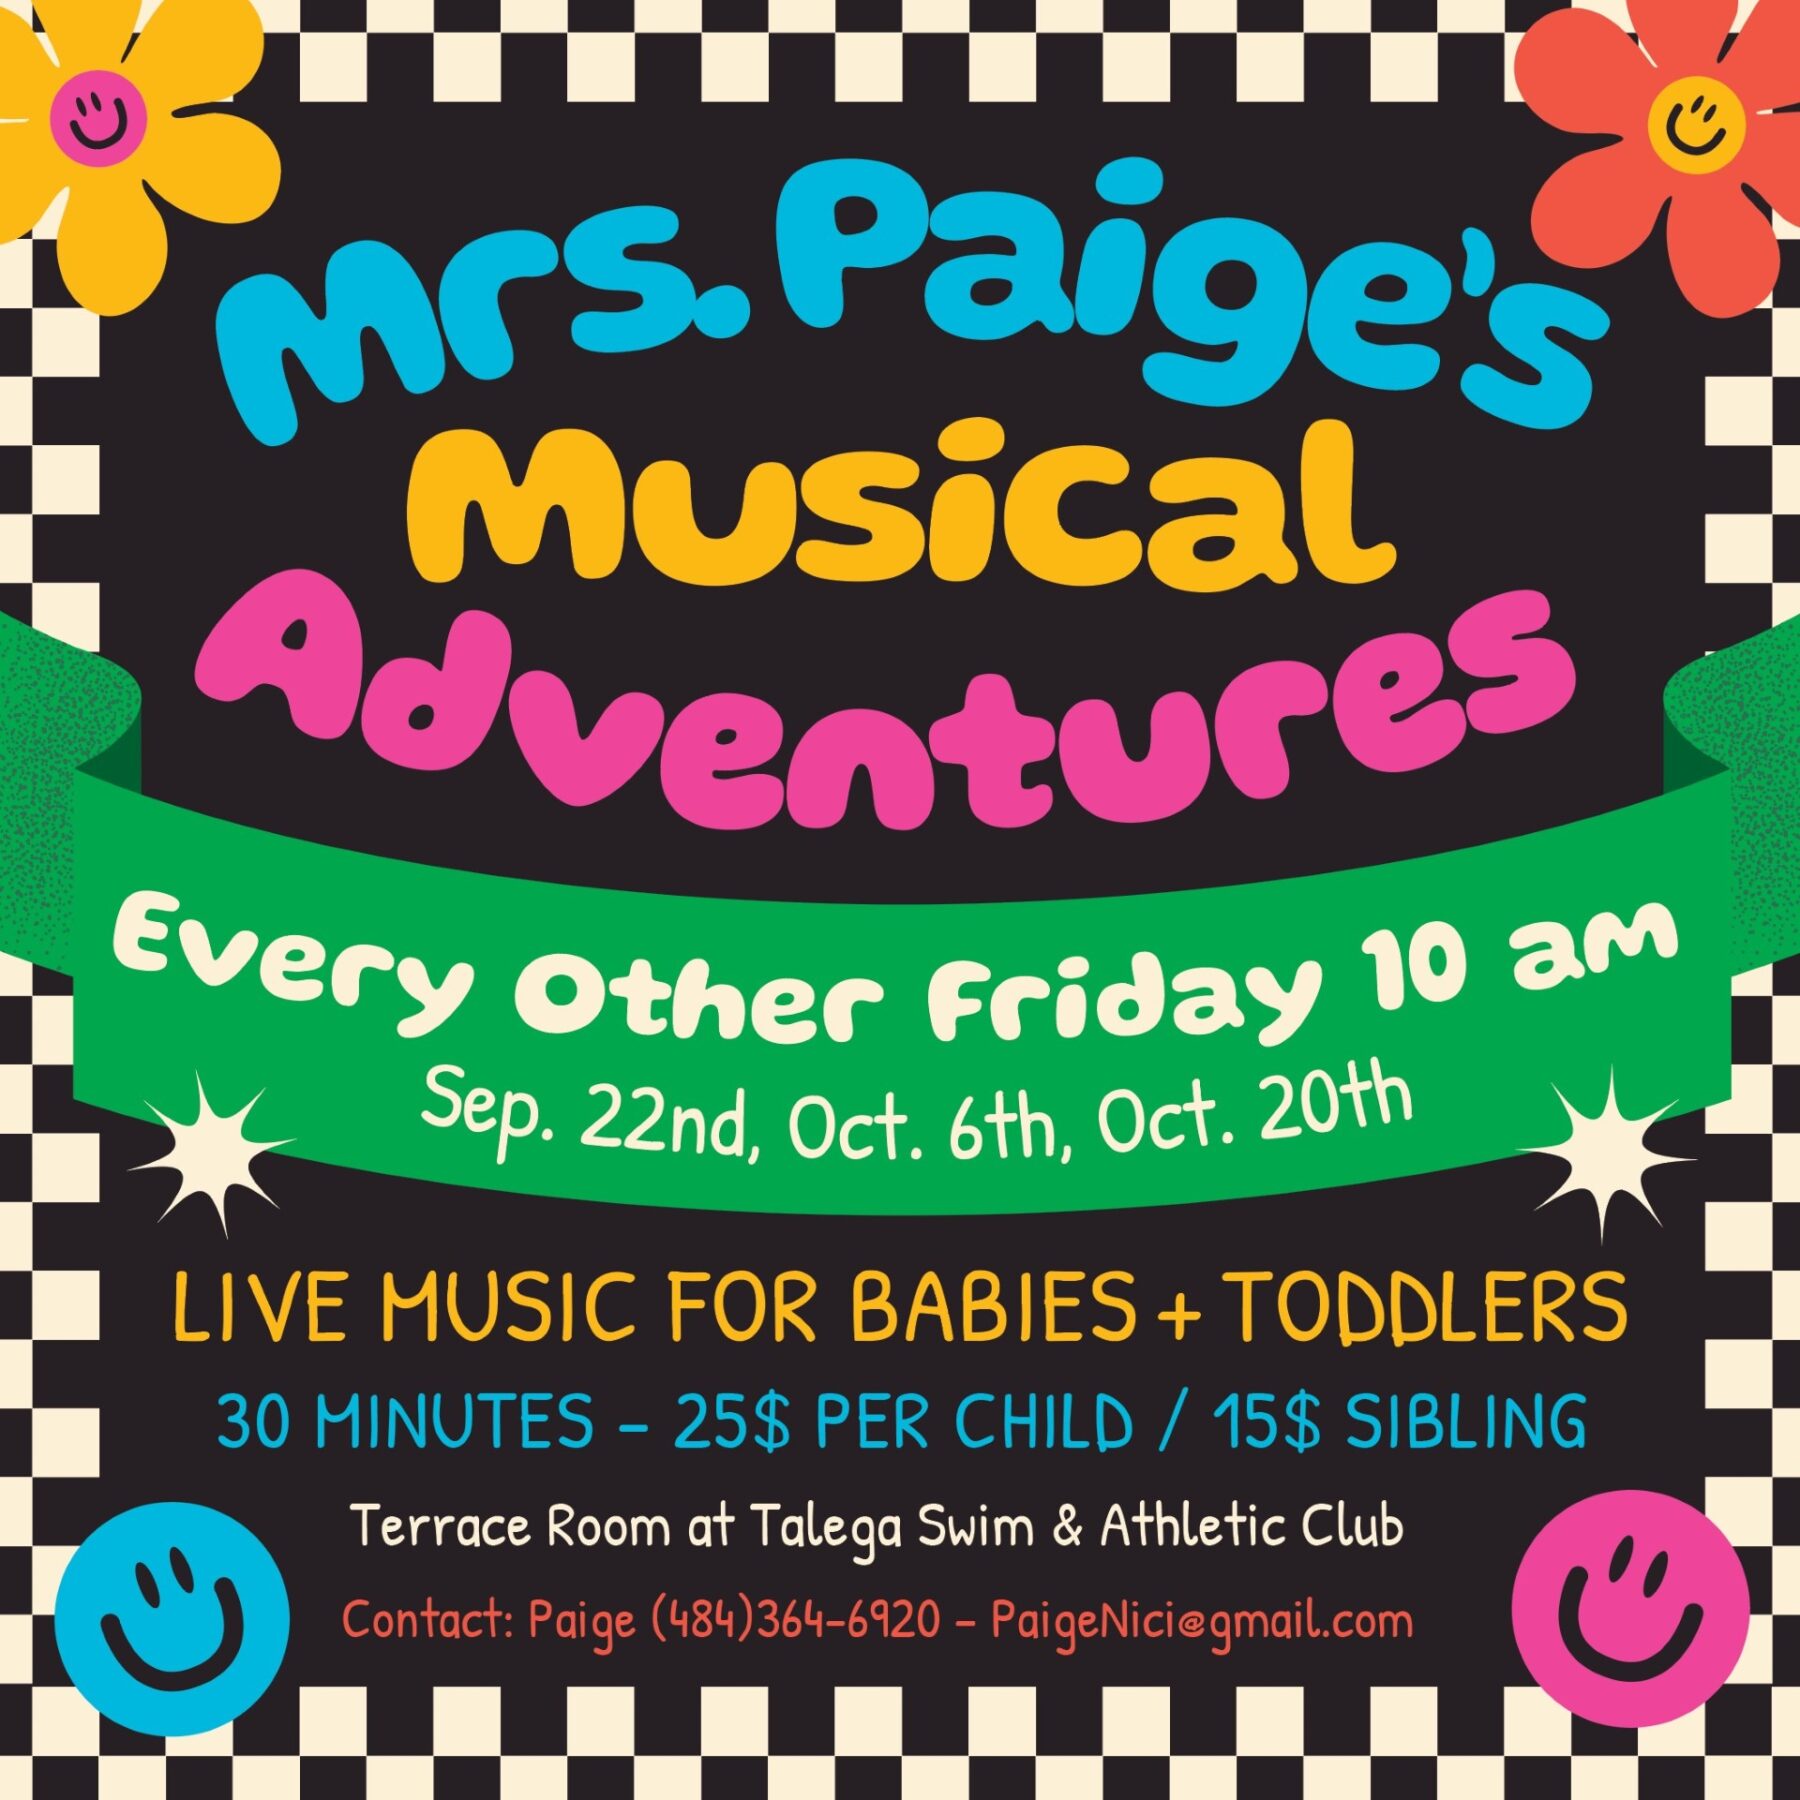 Mrs. Paige's Musical Adventures - Talega Today